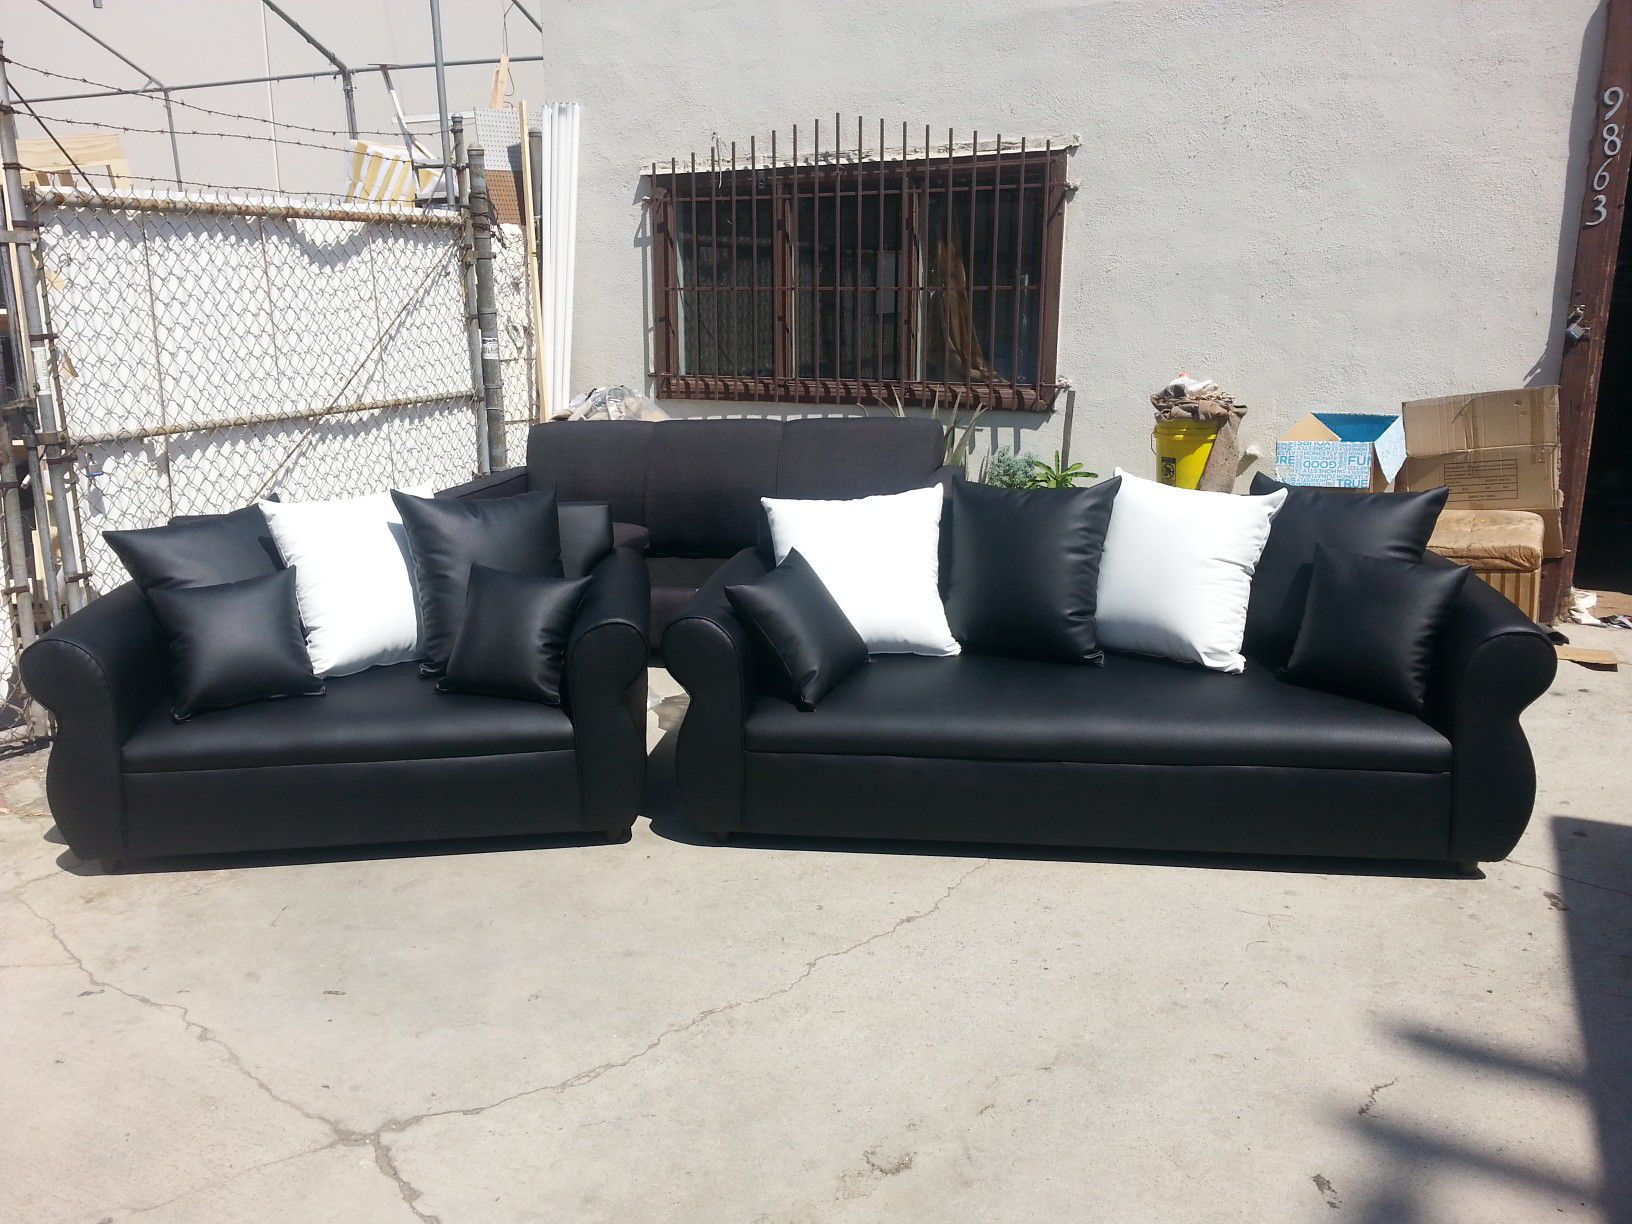 NEW BLACK LEATHER COUCHES